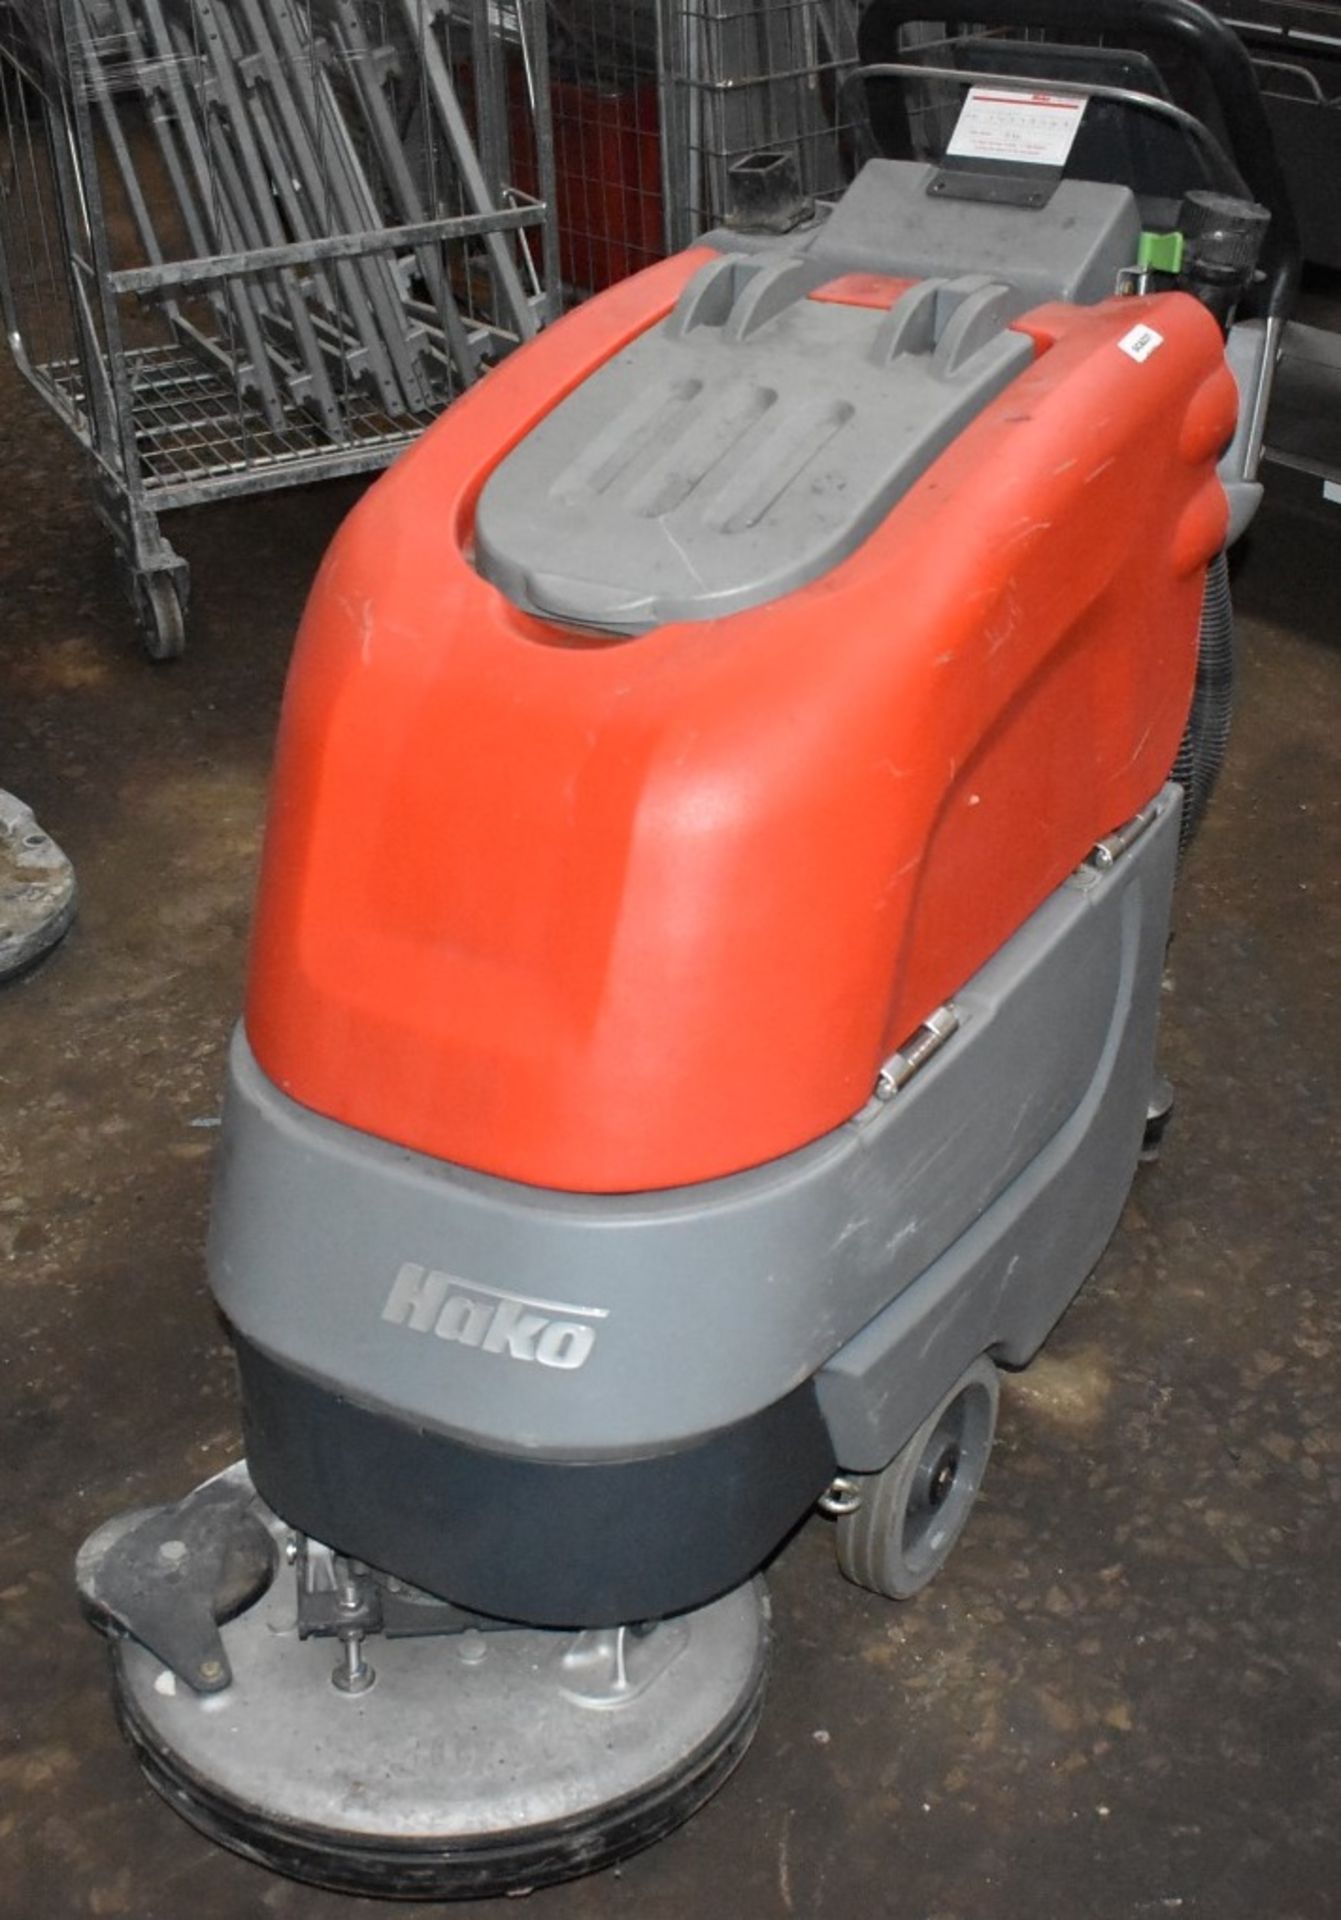 1 x Hako Scrubmaster B30 Commercial Floor Cleaner - Recently Removed From a Supermarket